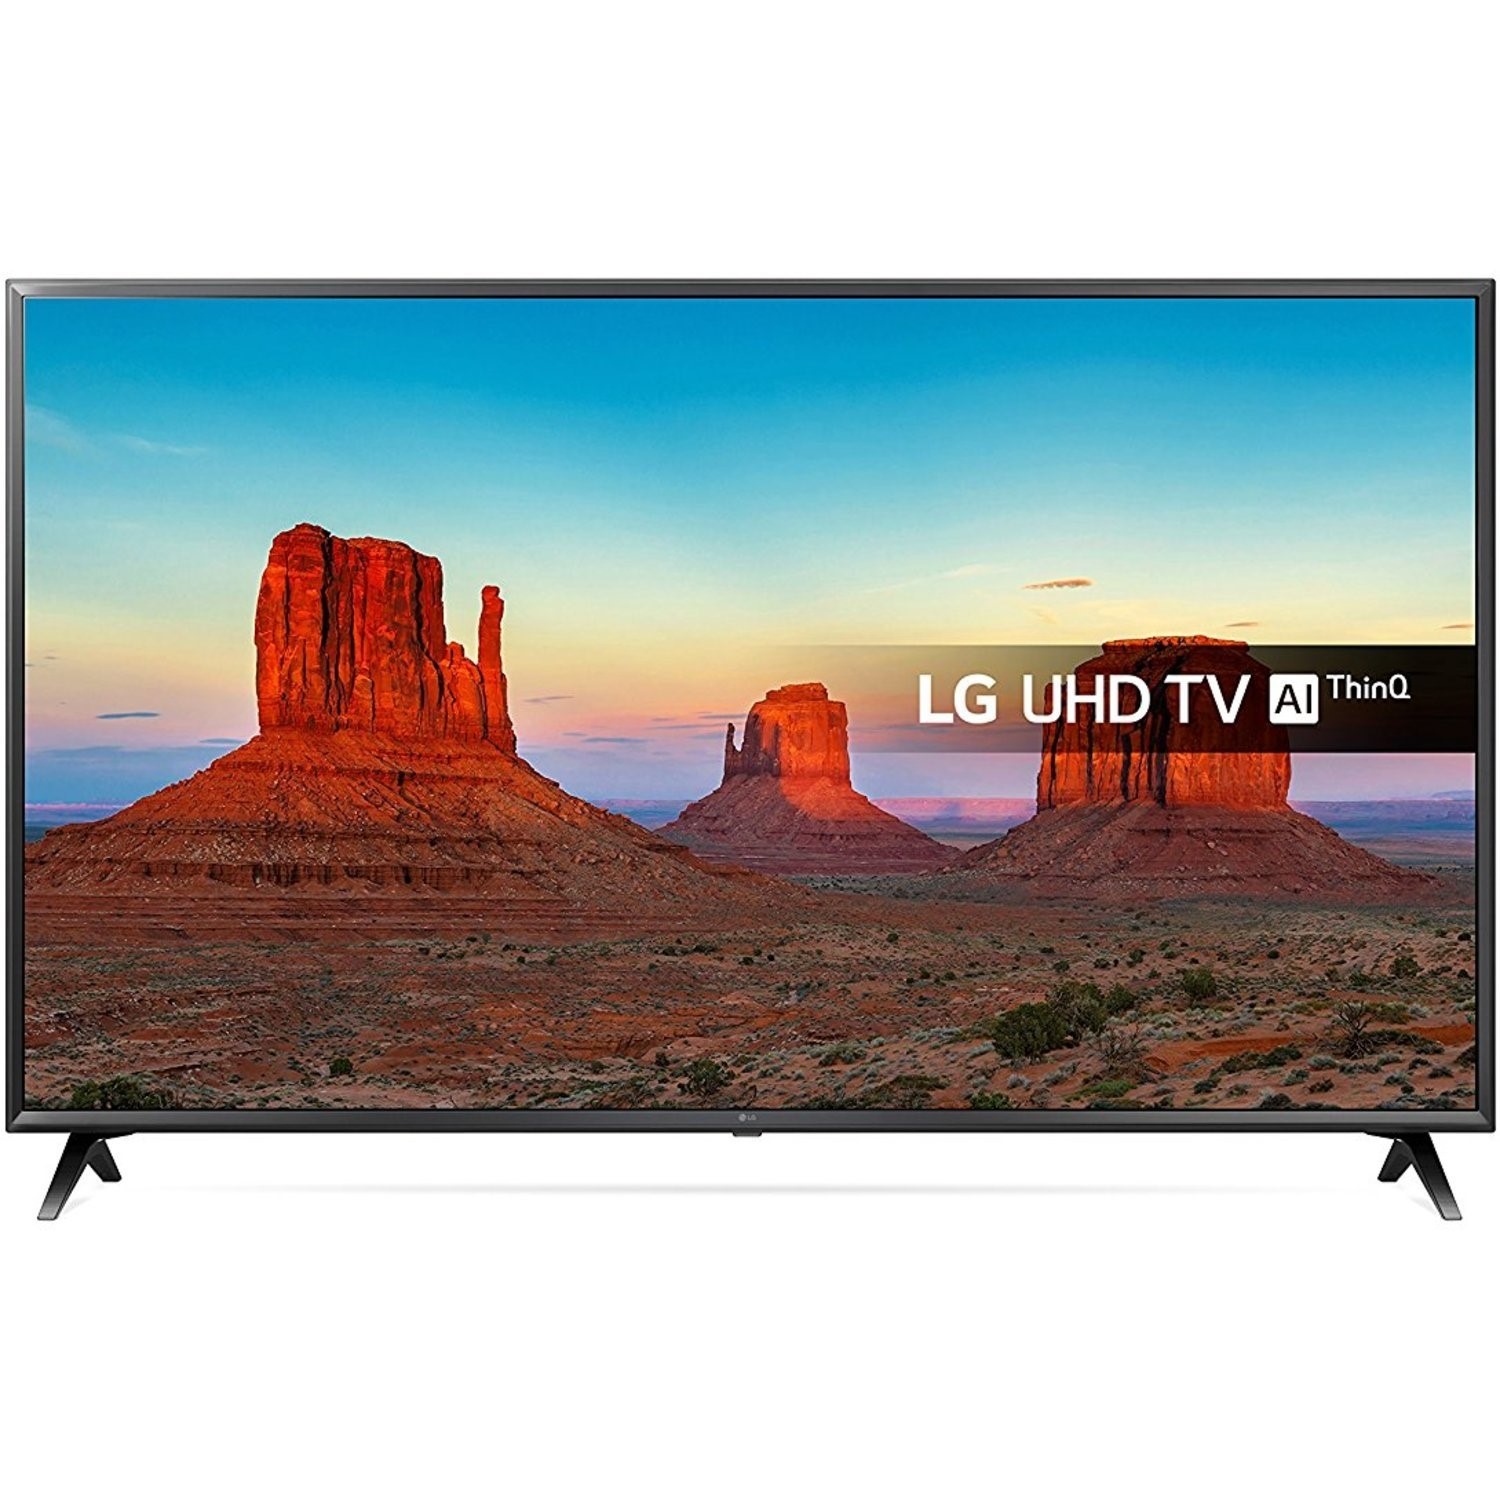 LG 55UK6300PLB 4K Ultra HD HDR LED TV with Freeview and Freesat - Laptops Direct